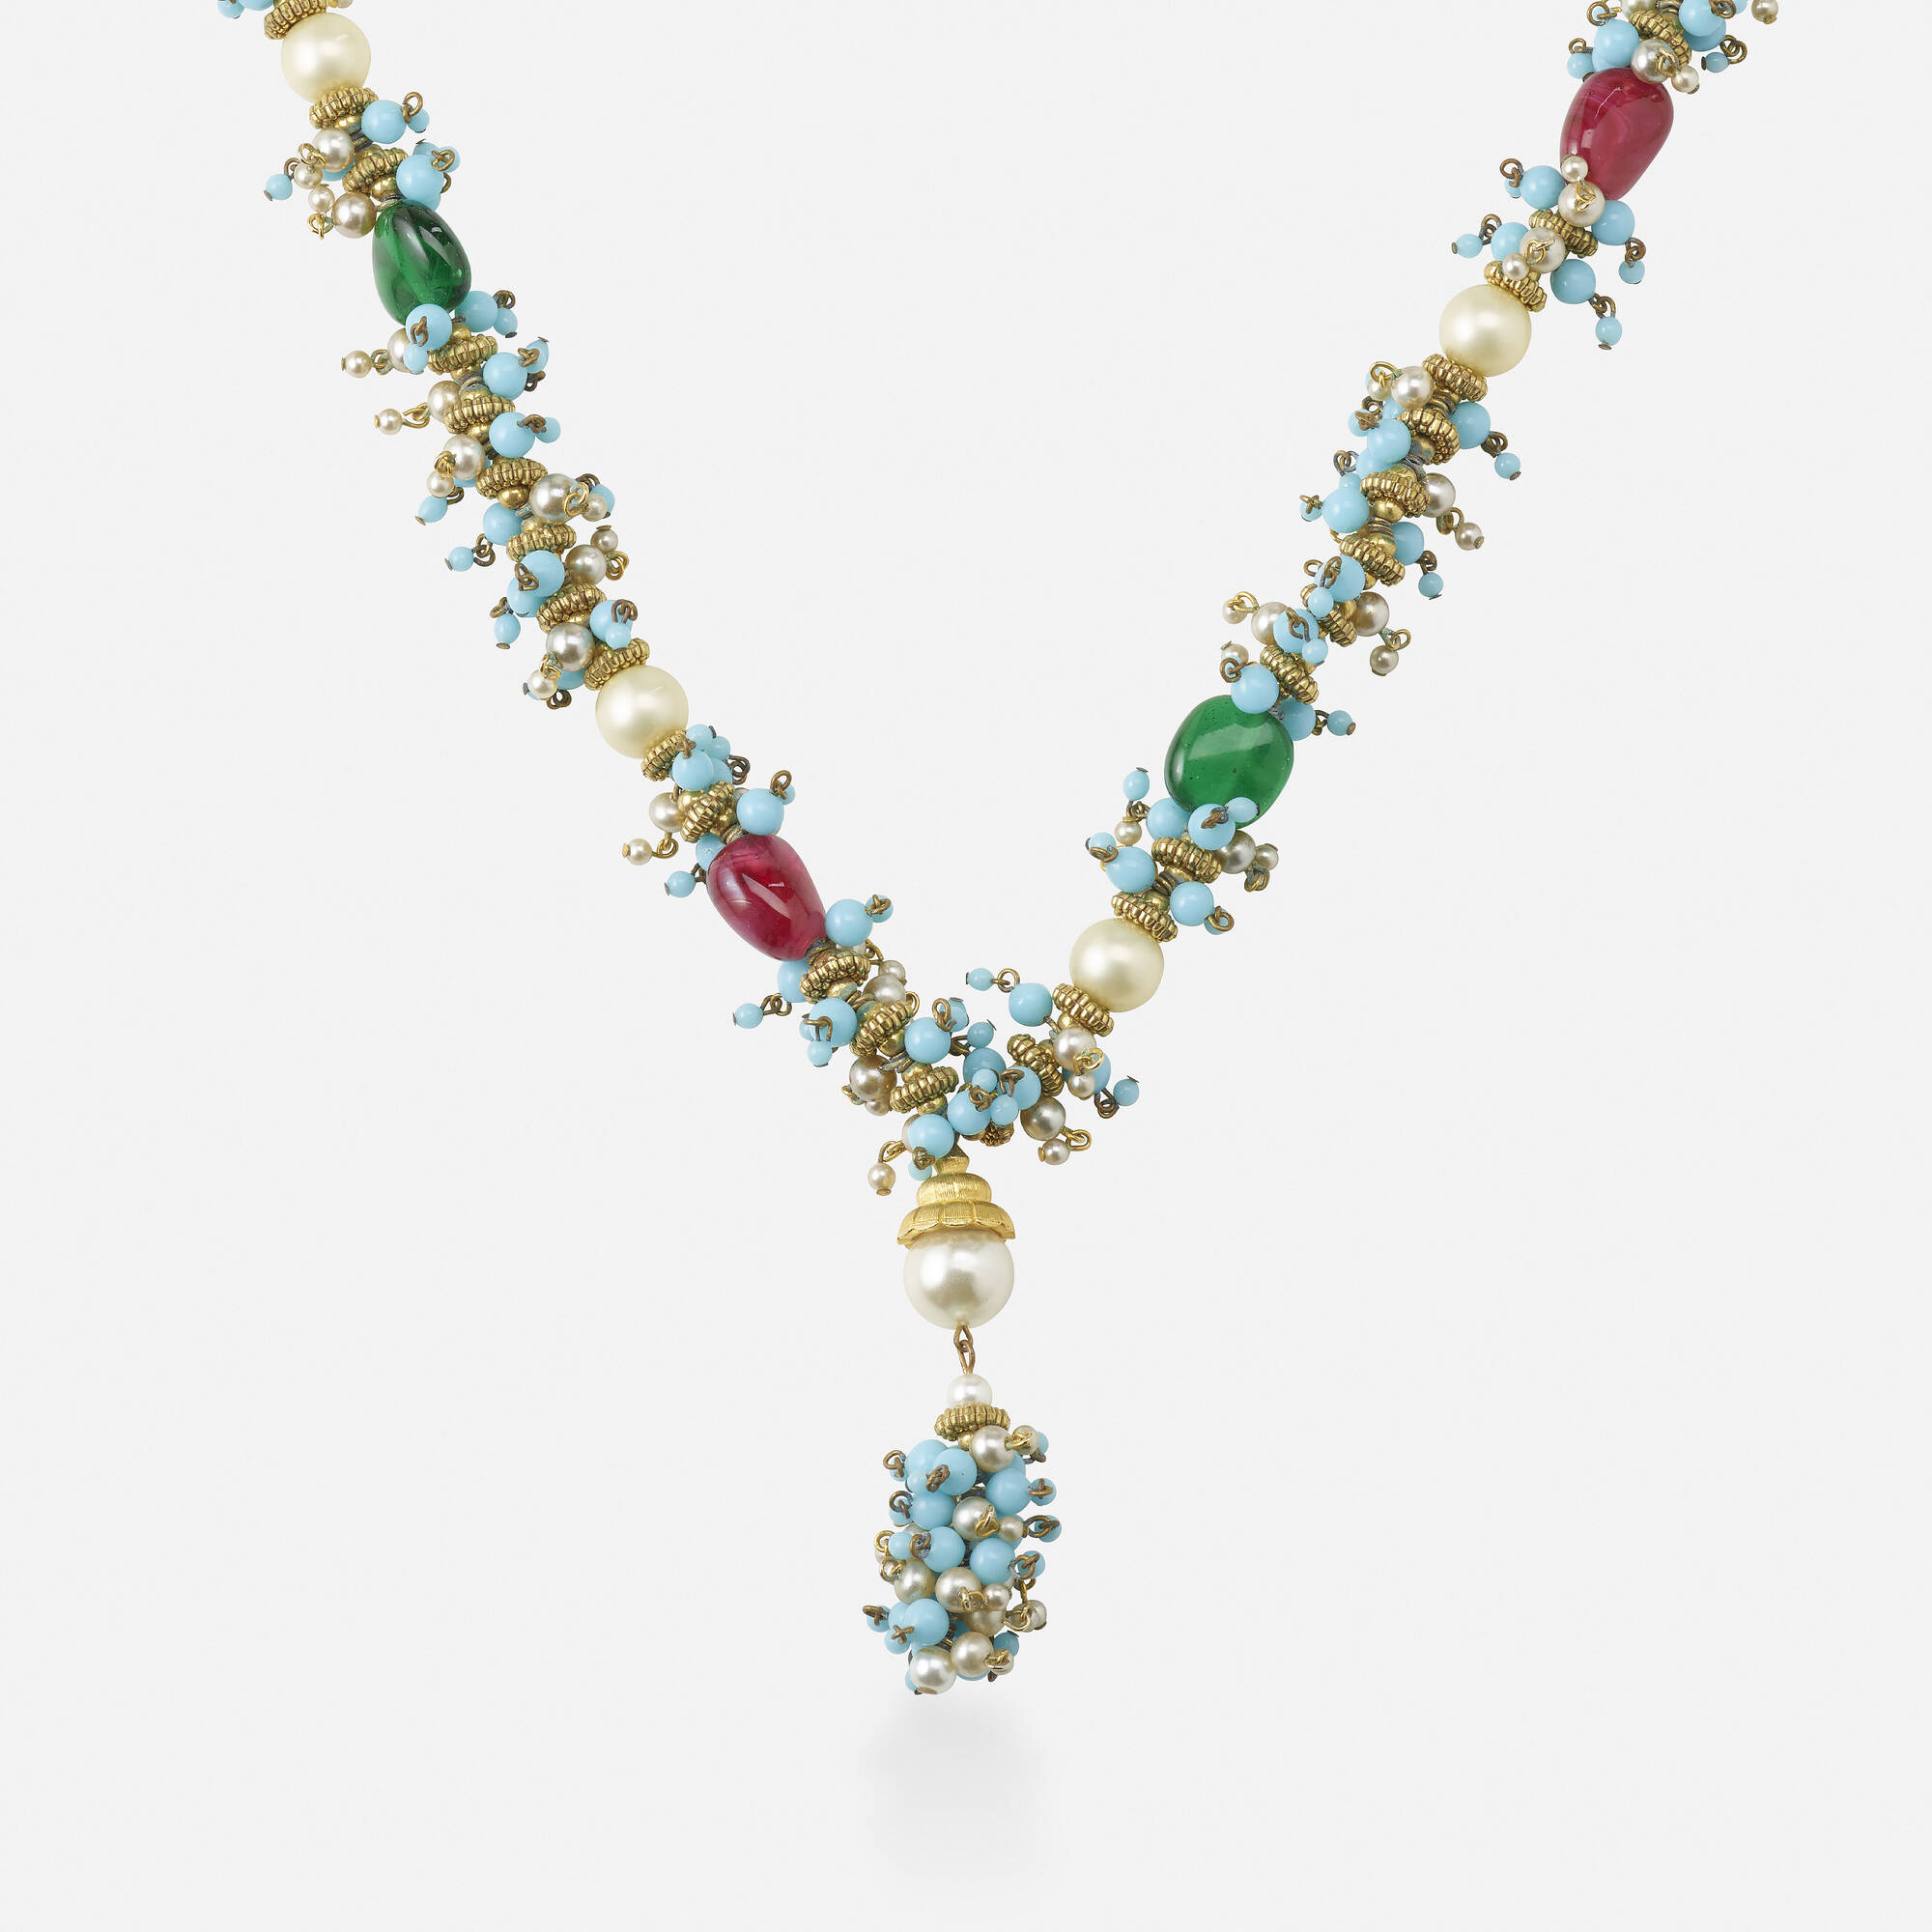 469: MASON GRIPOIX FOR CHANEL, Necklace < Spring Jewels, 5 May